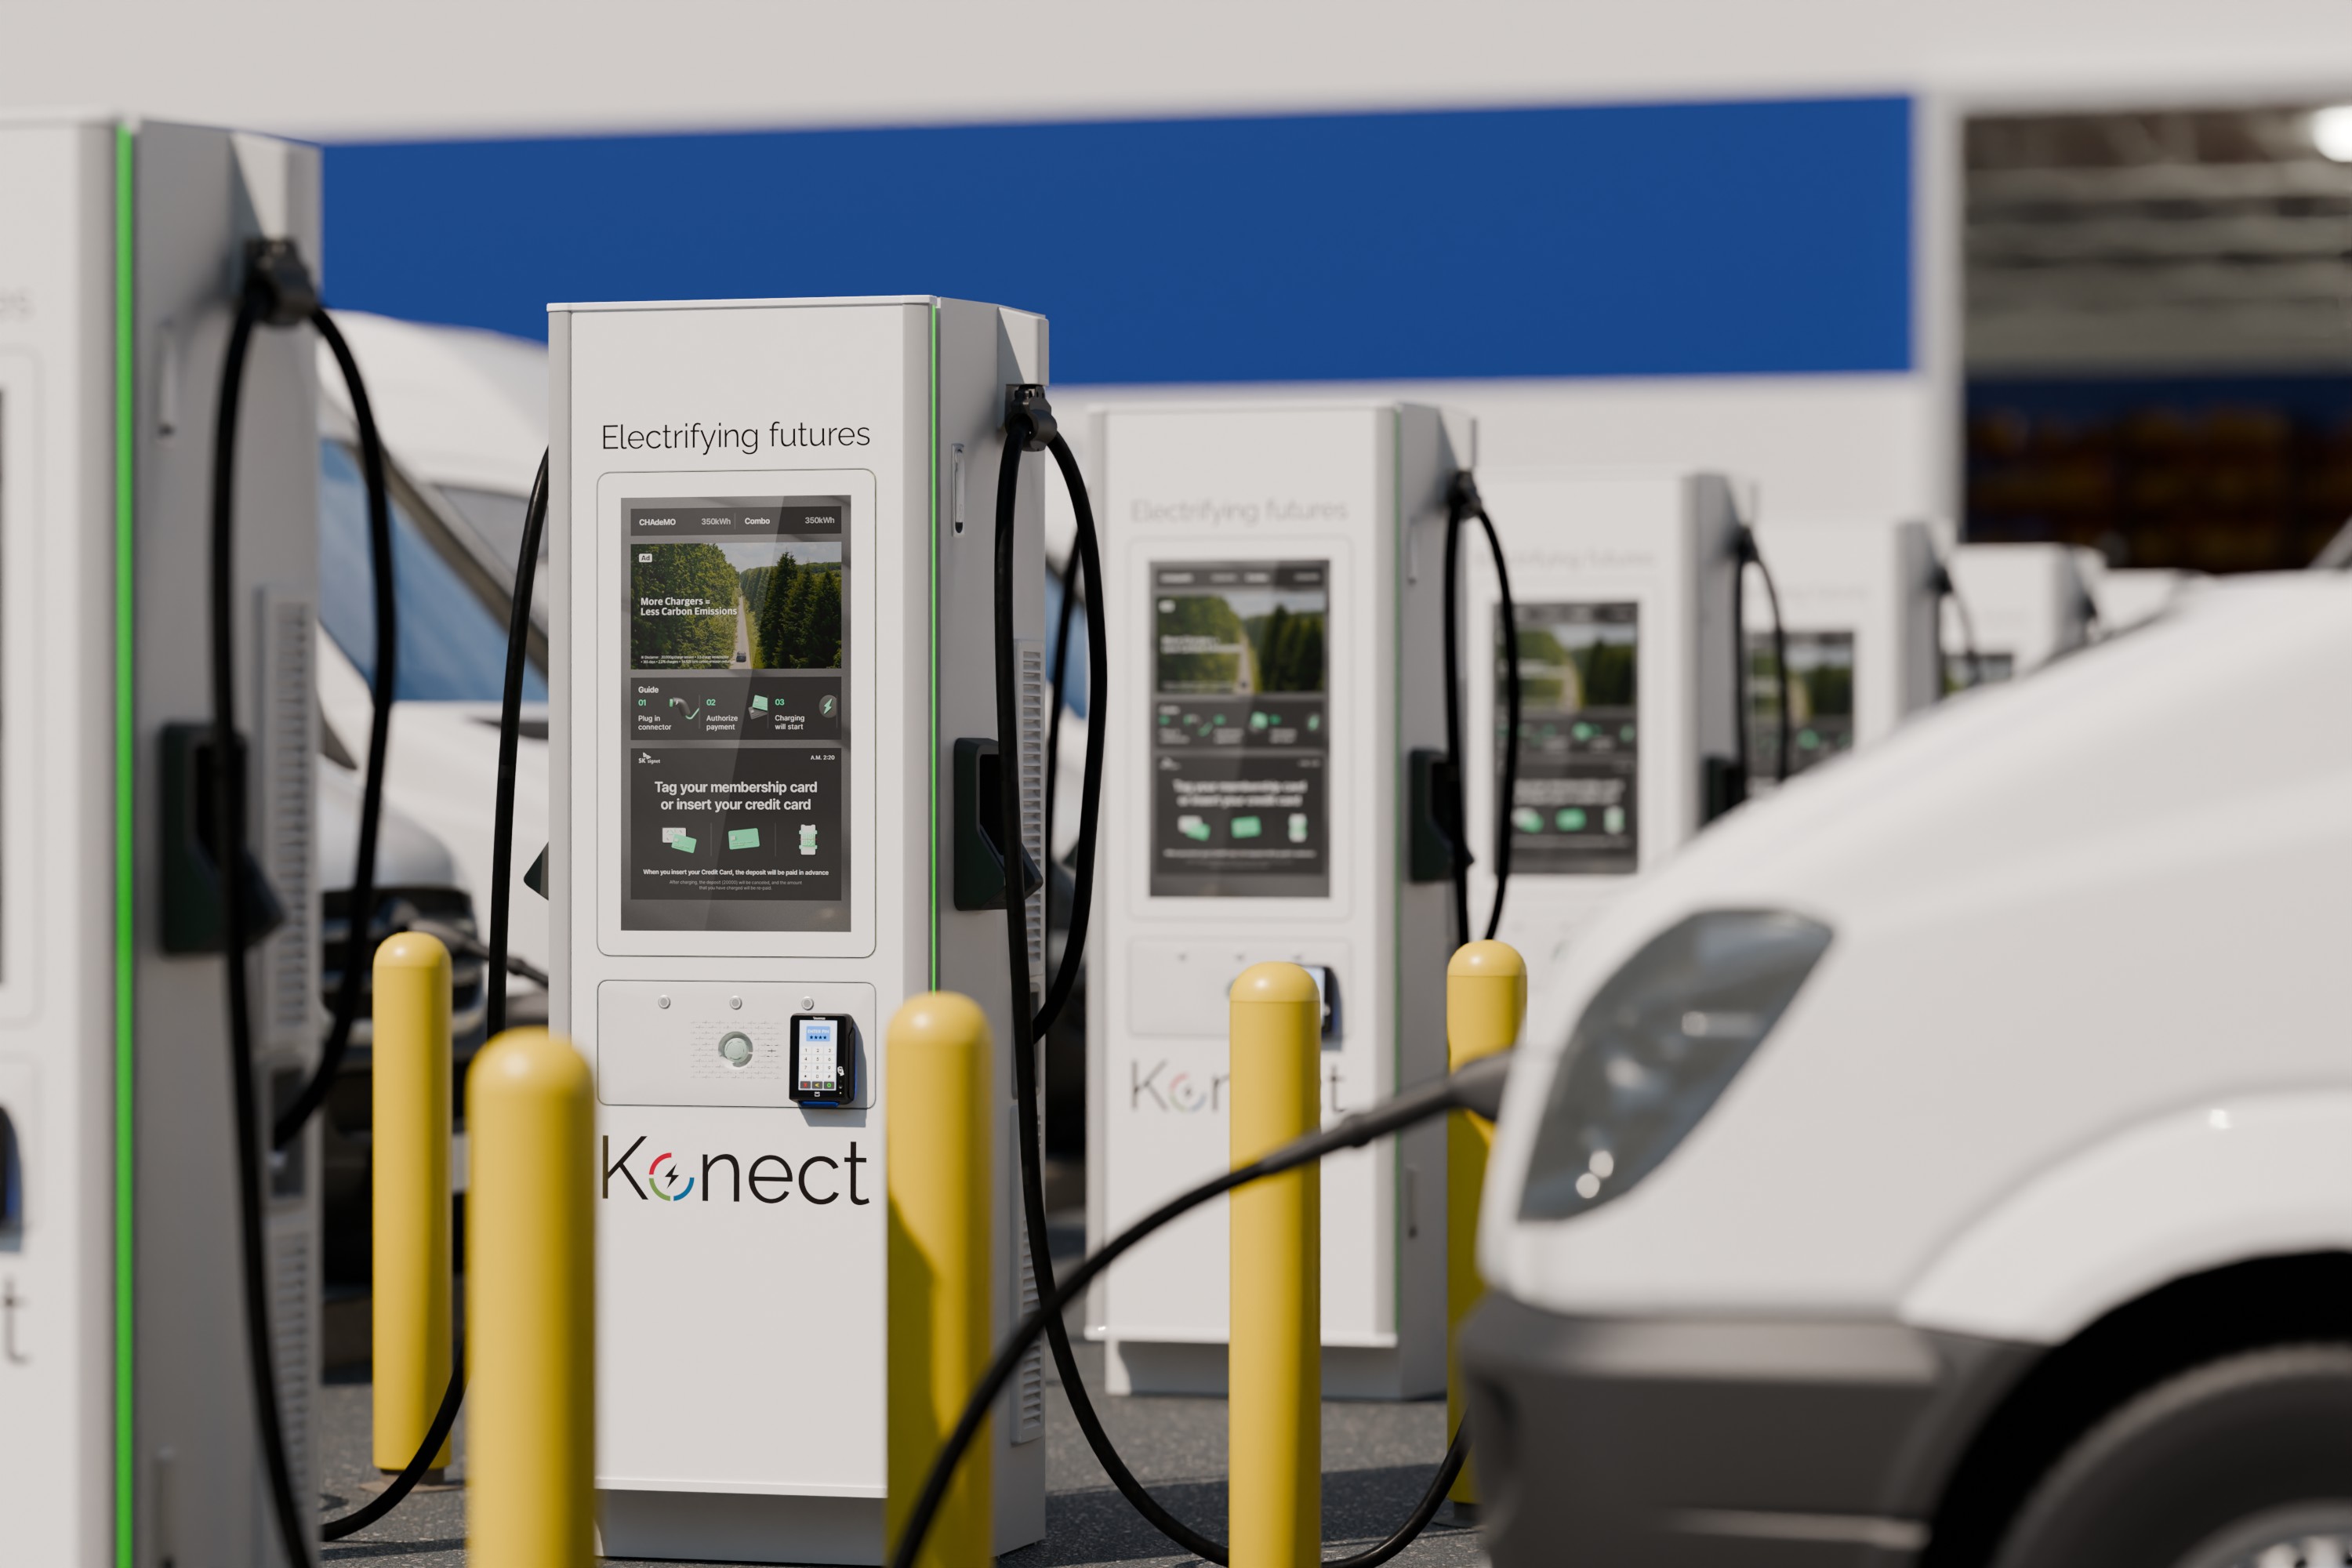 Konect delivers a comprehensive turnkey EV charging infrastructure specifically designed to enhance fuel retailers' ROI and accelerate the transition to electric mobility